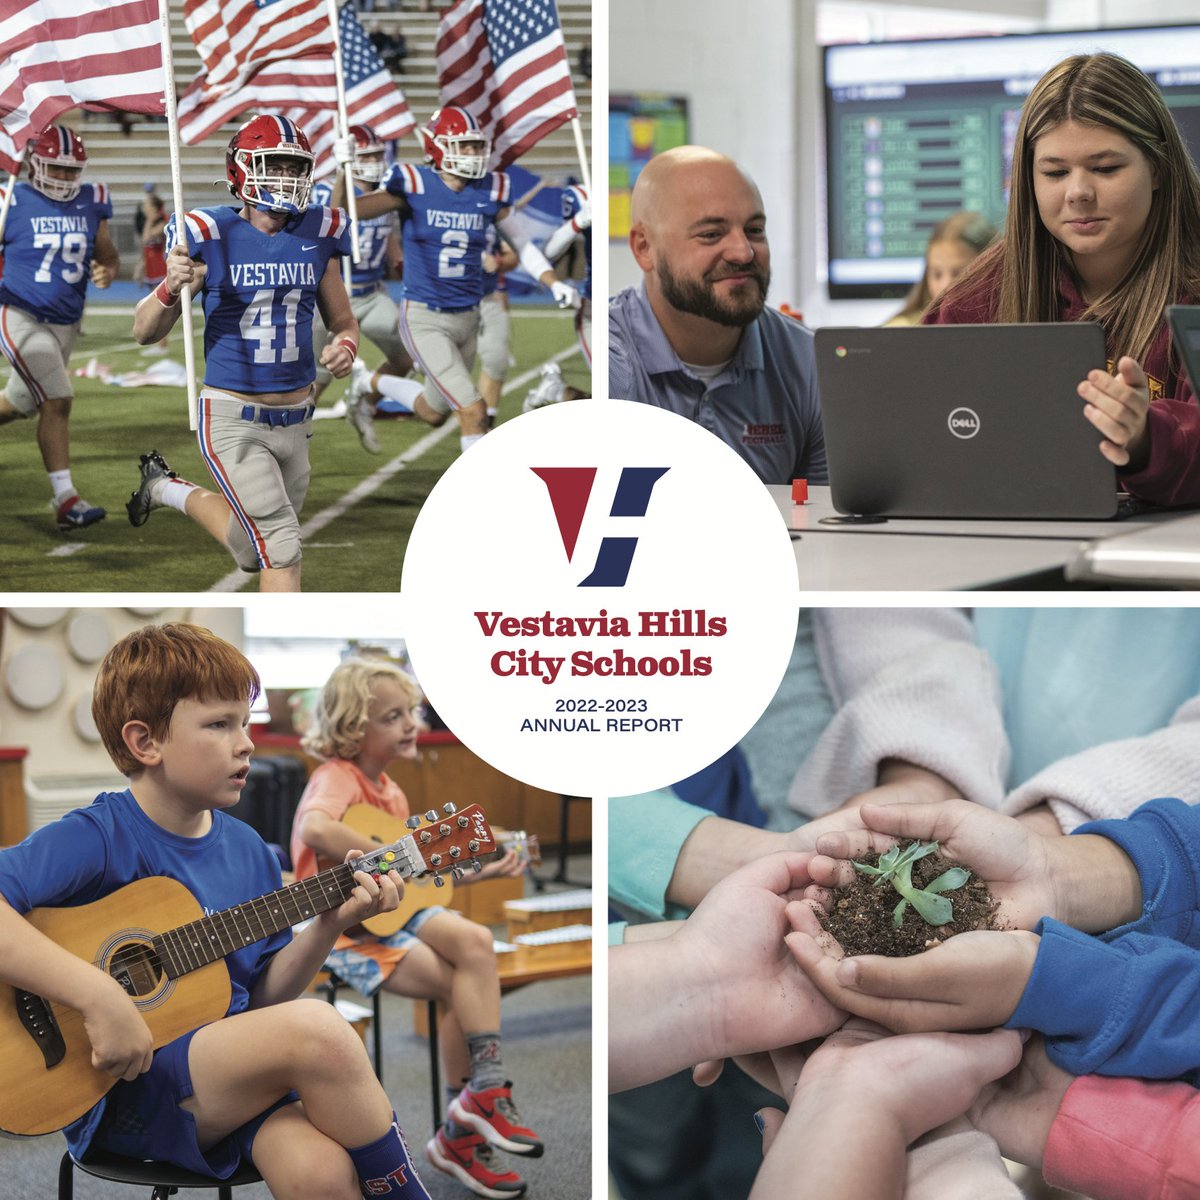 2023-24 is underway, but we're still celebrating all our students & schools accomplished last year! Pick up the brand new 2022-23 VHCS Annual Report at any of our schools, the Board of Education, City Hall, Chamber of Commerce, or online: vhcs.us/reports